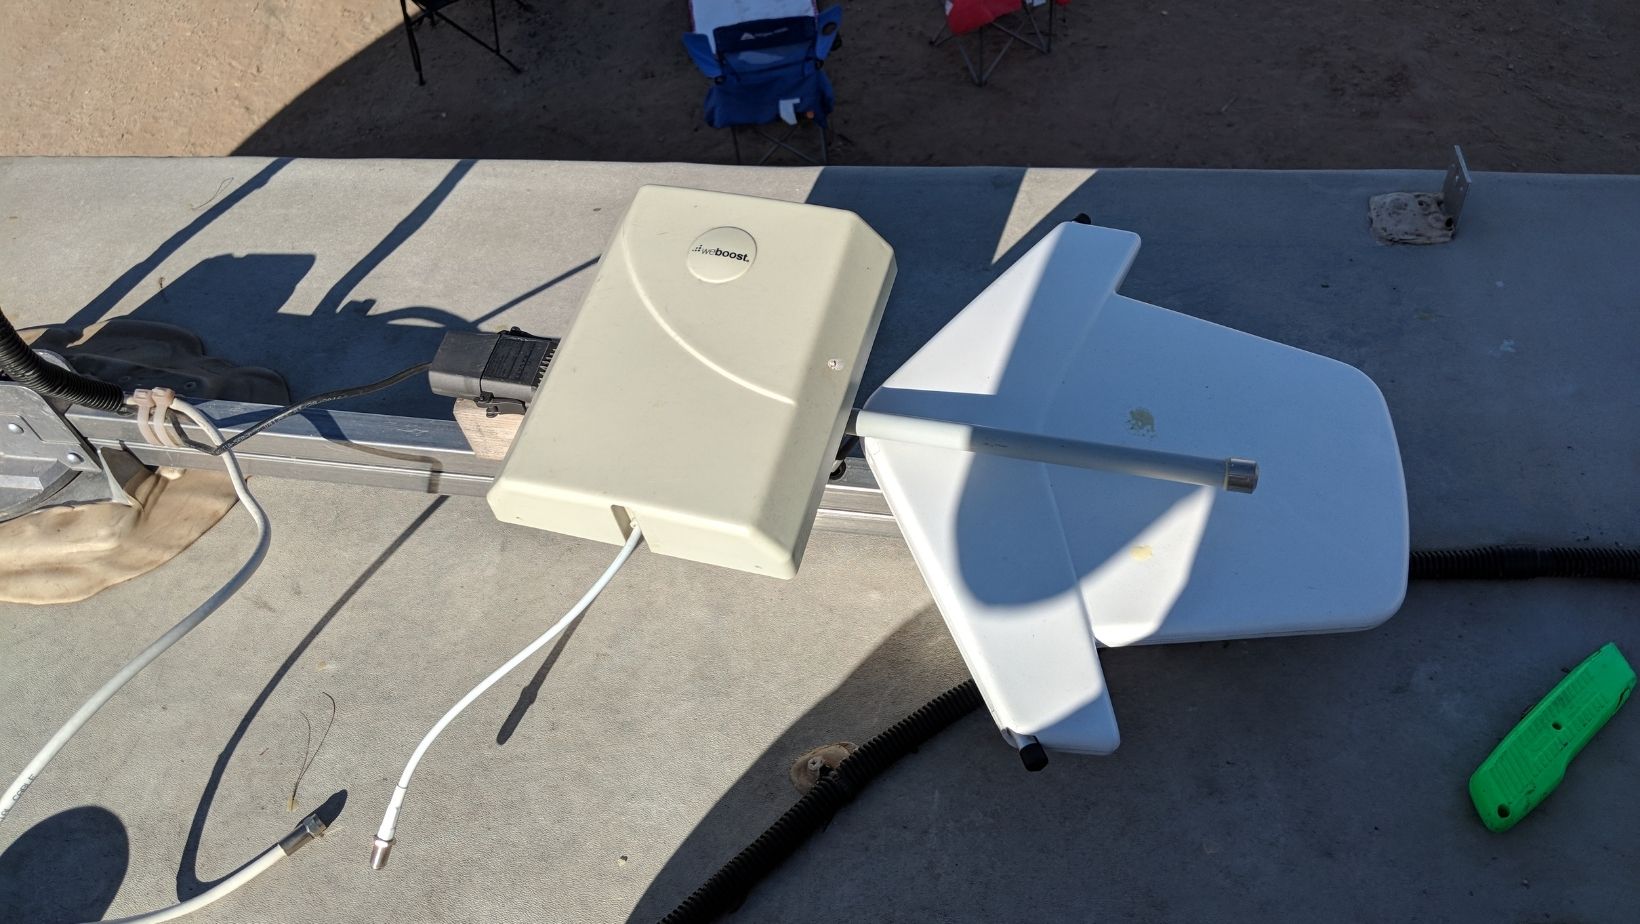 Different kinds of antennas to help with cellular internet for RVers